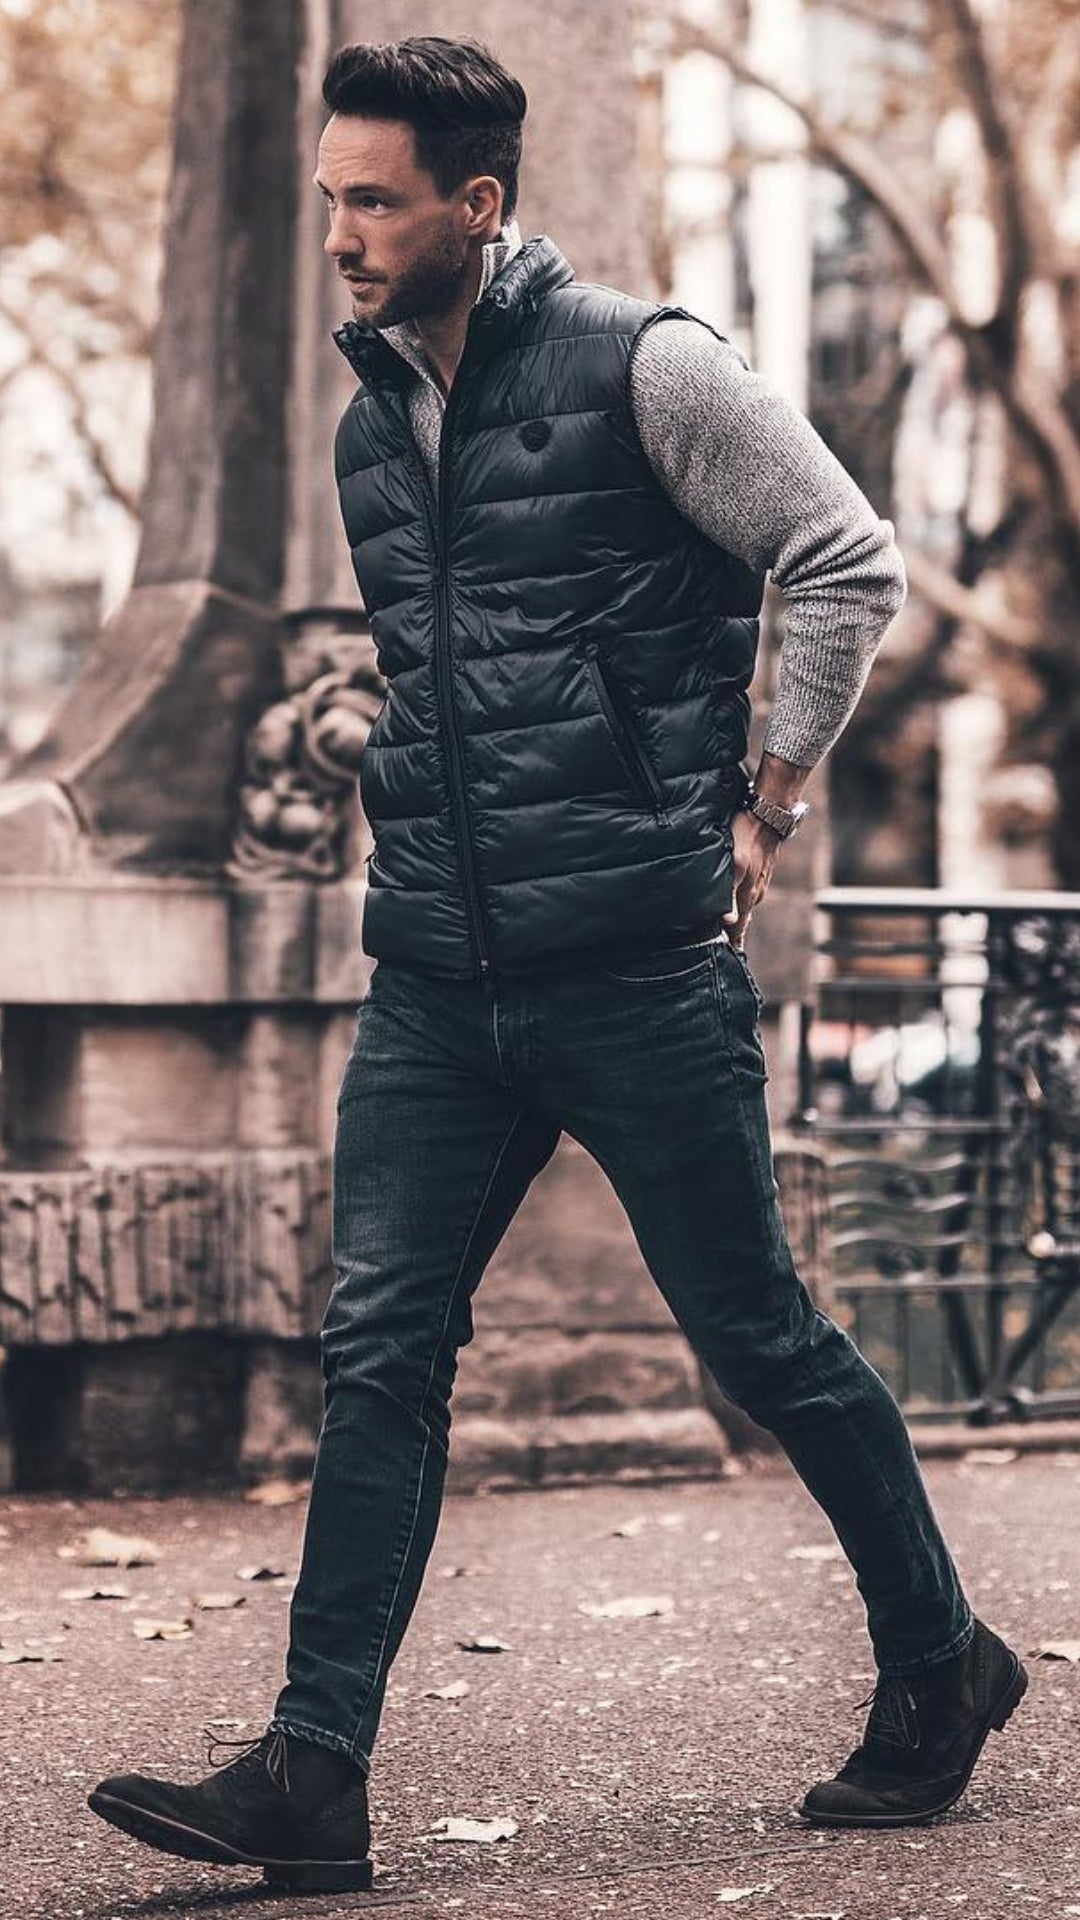 5 coolest winter outfits for men #winter #style #fallstyle #mens #fashion #street #style